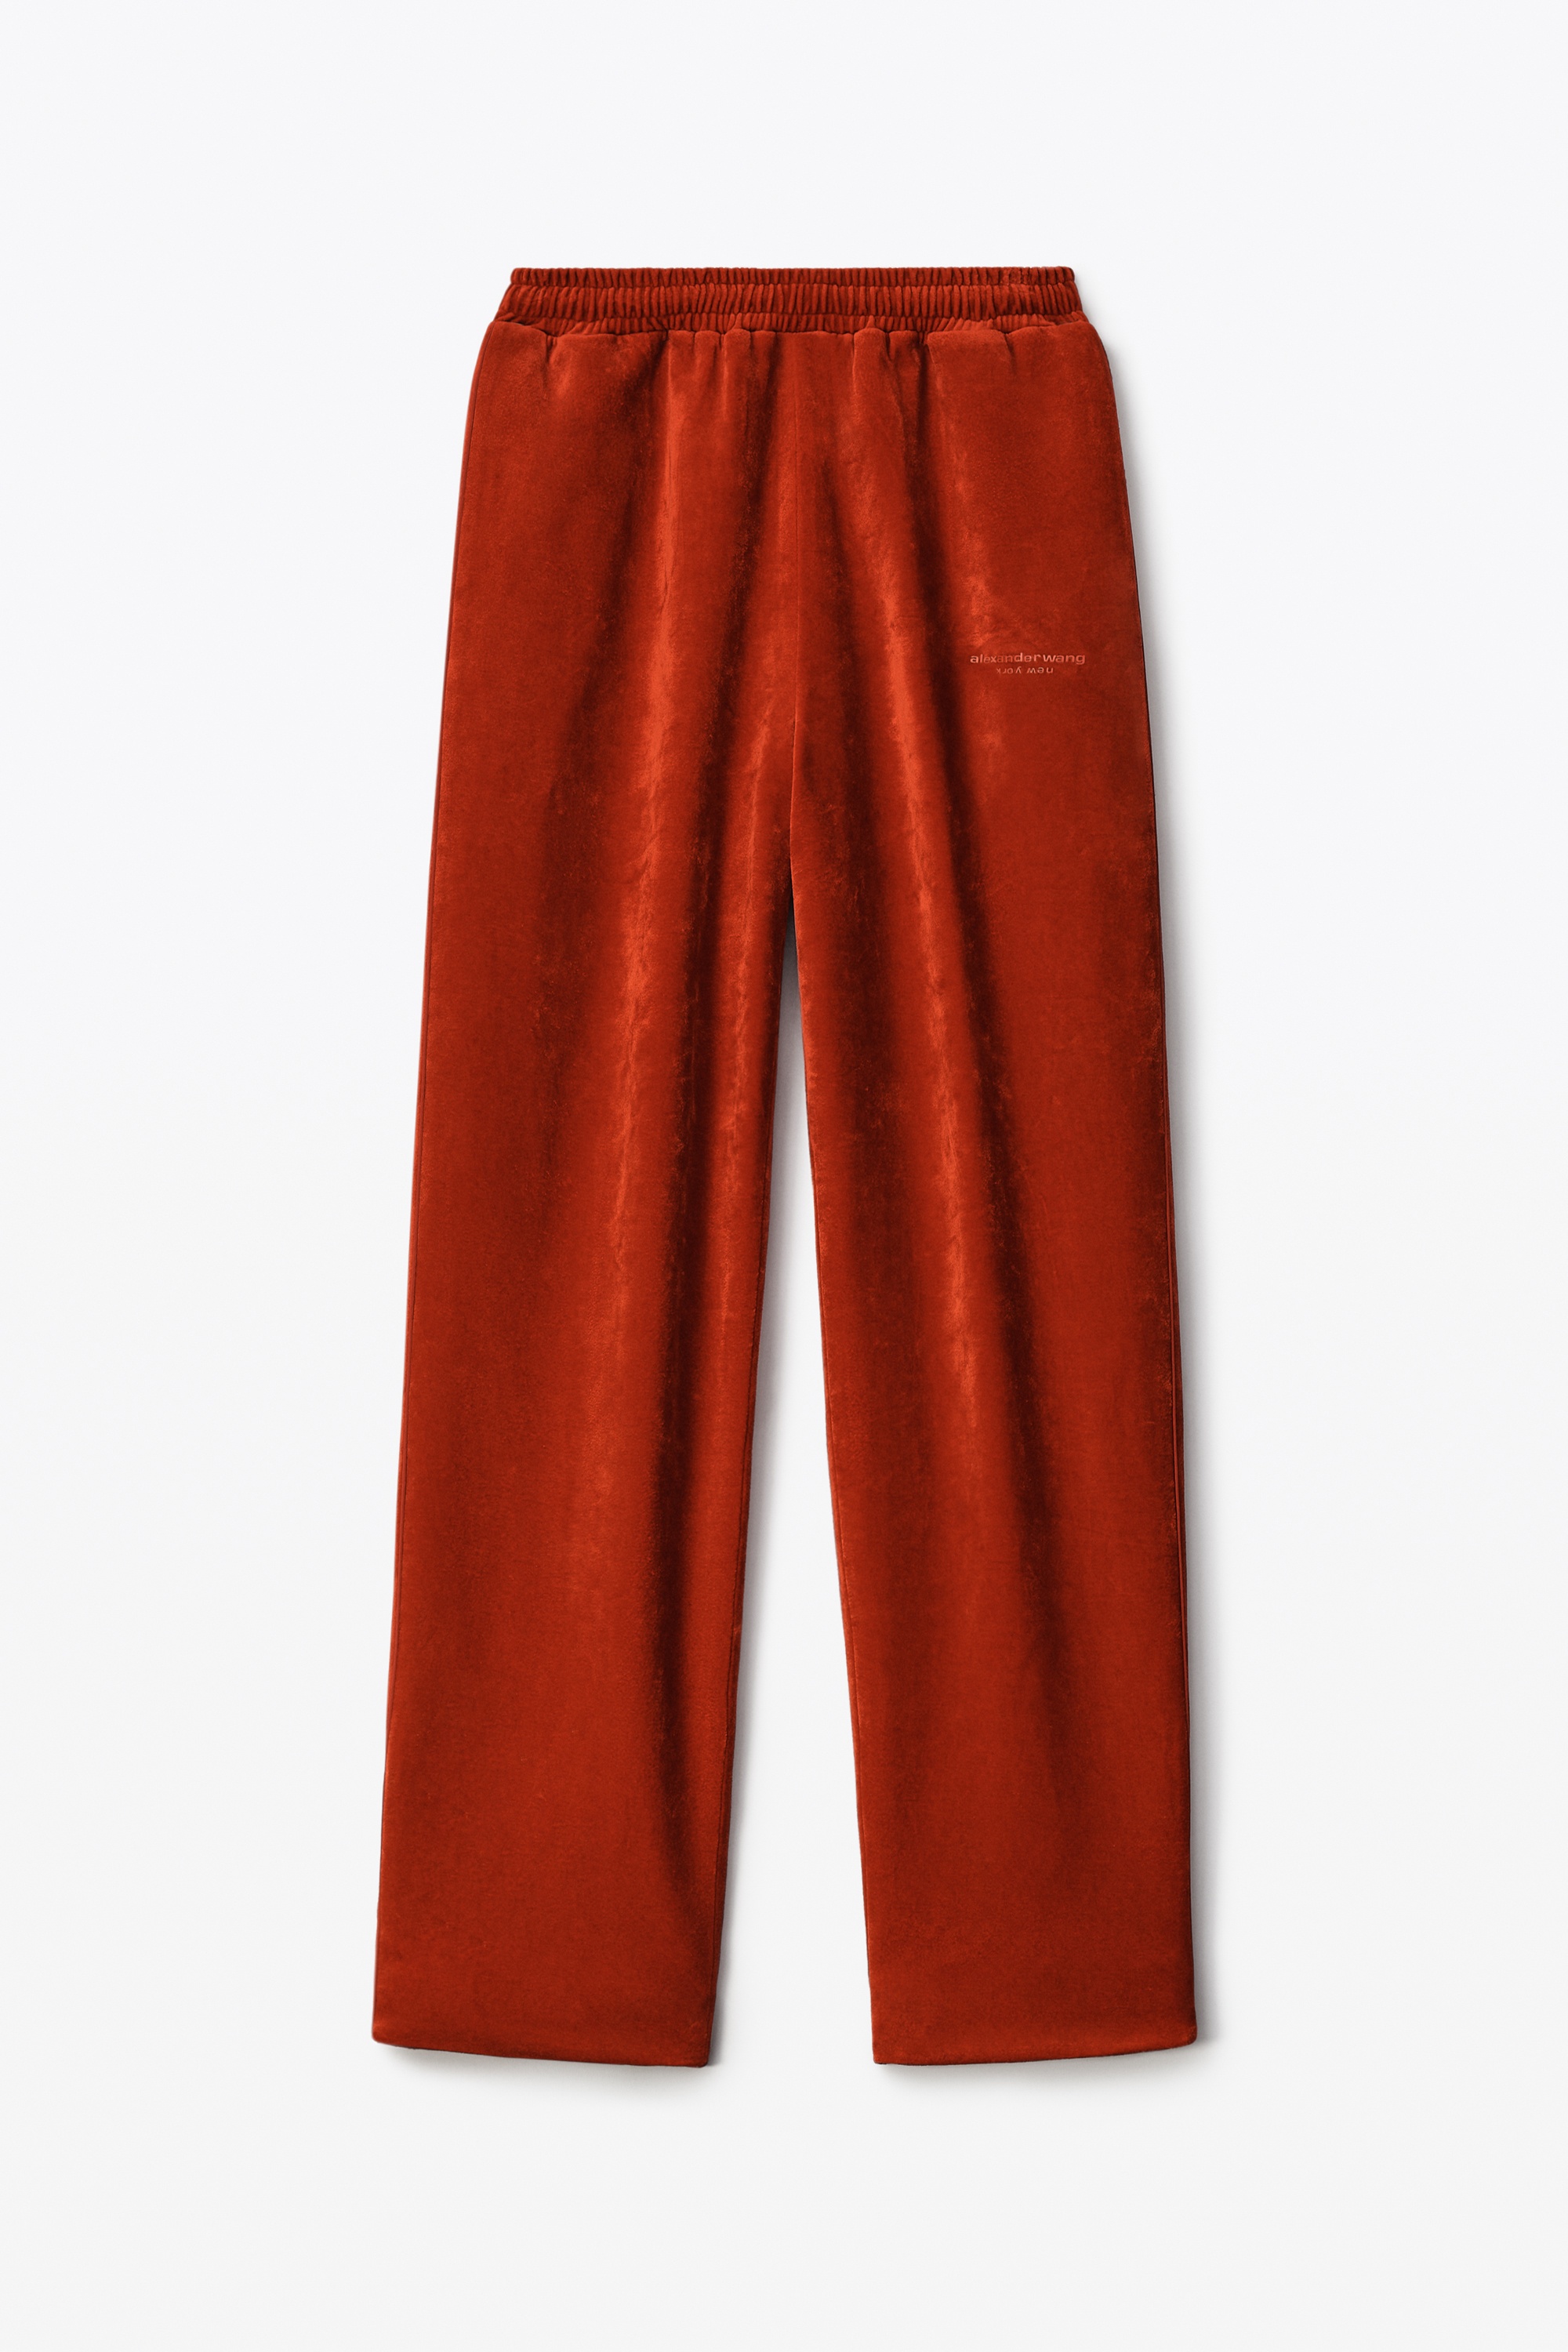 TRACK PANT IN CRUSHED VELOUR - 1